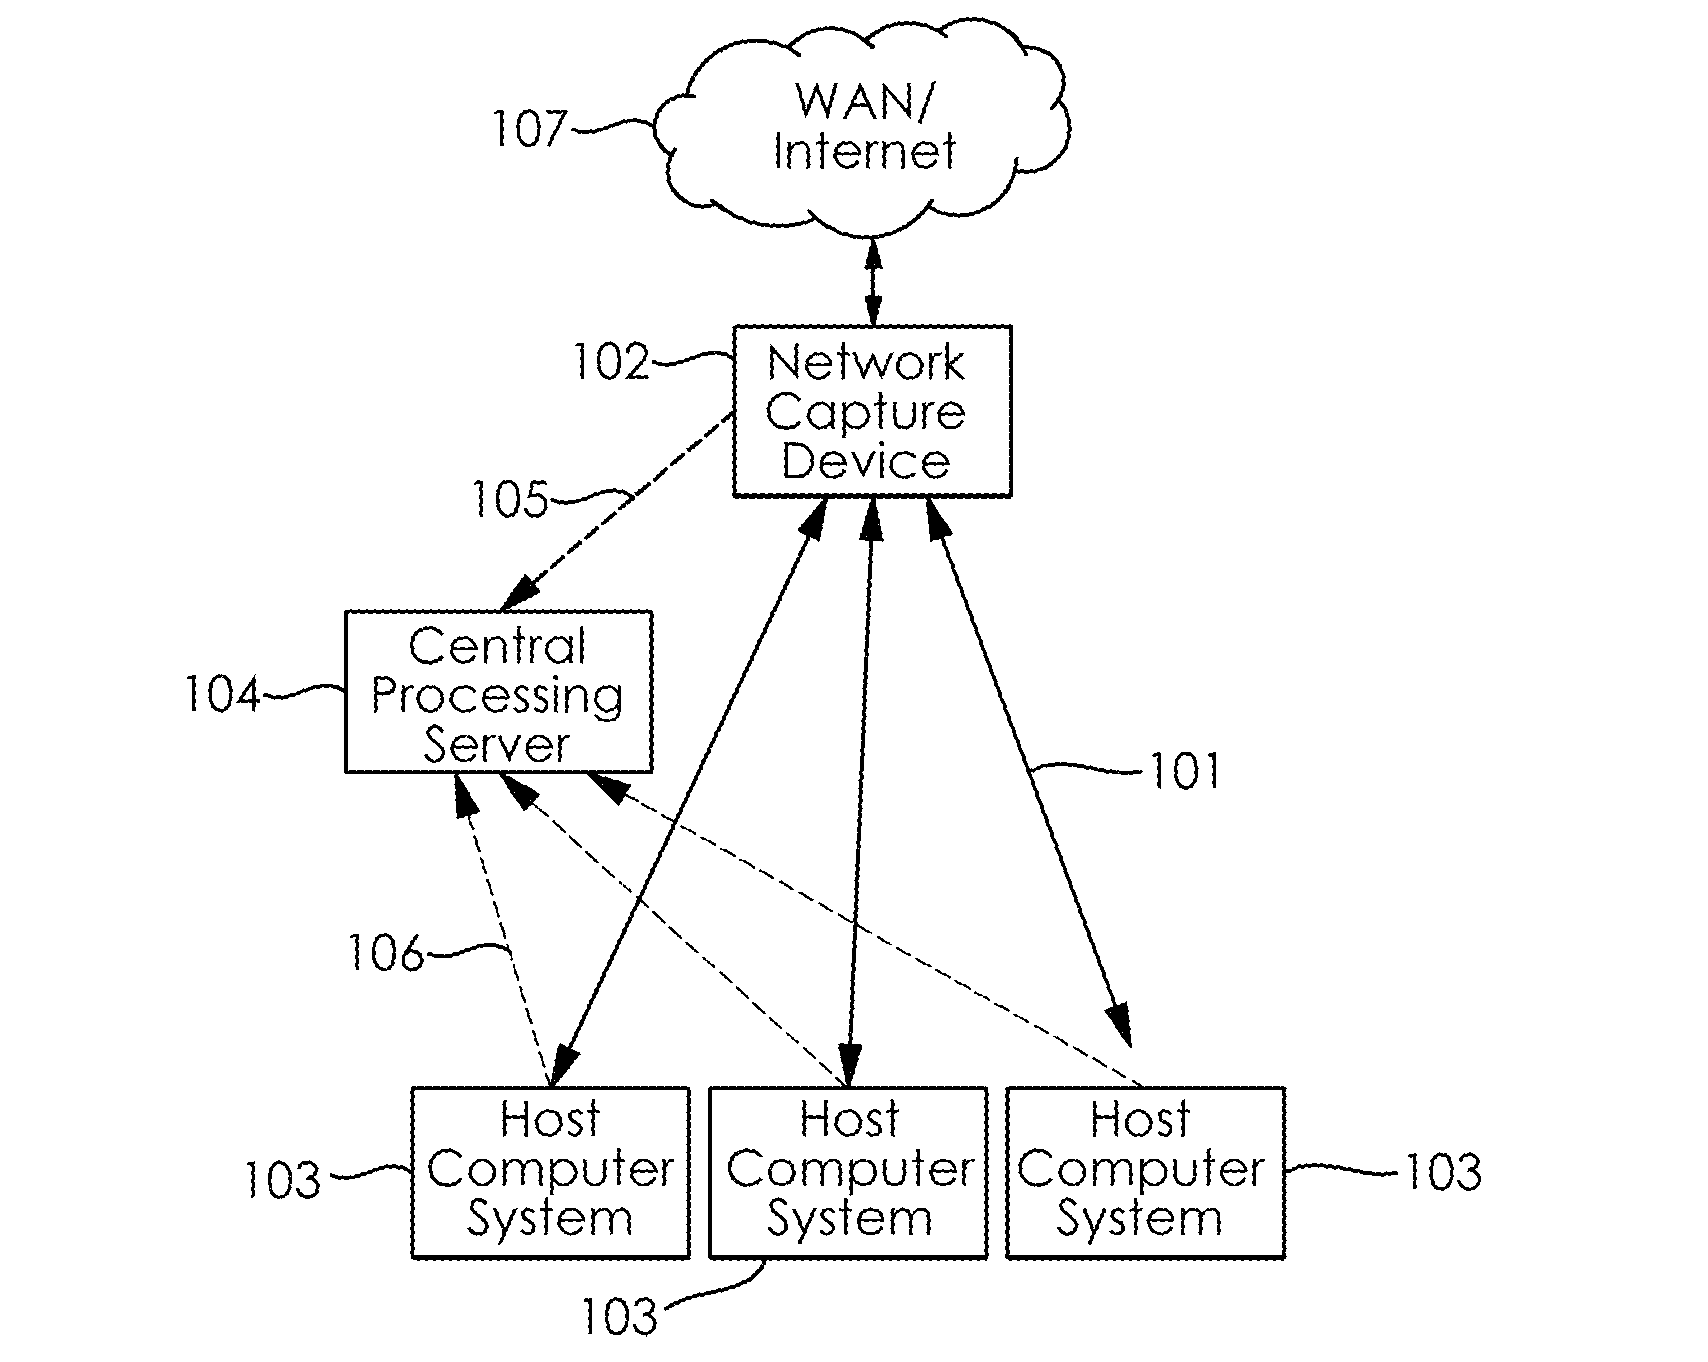 Identifying stealth packets in network communications through use of packet headers